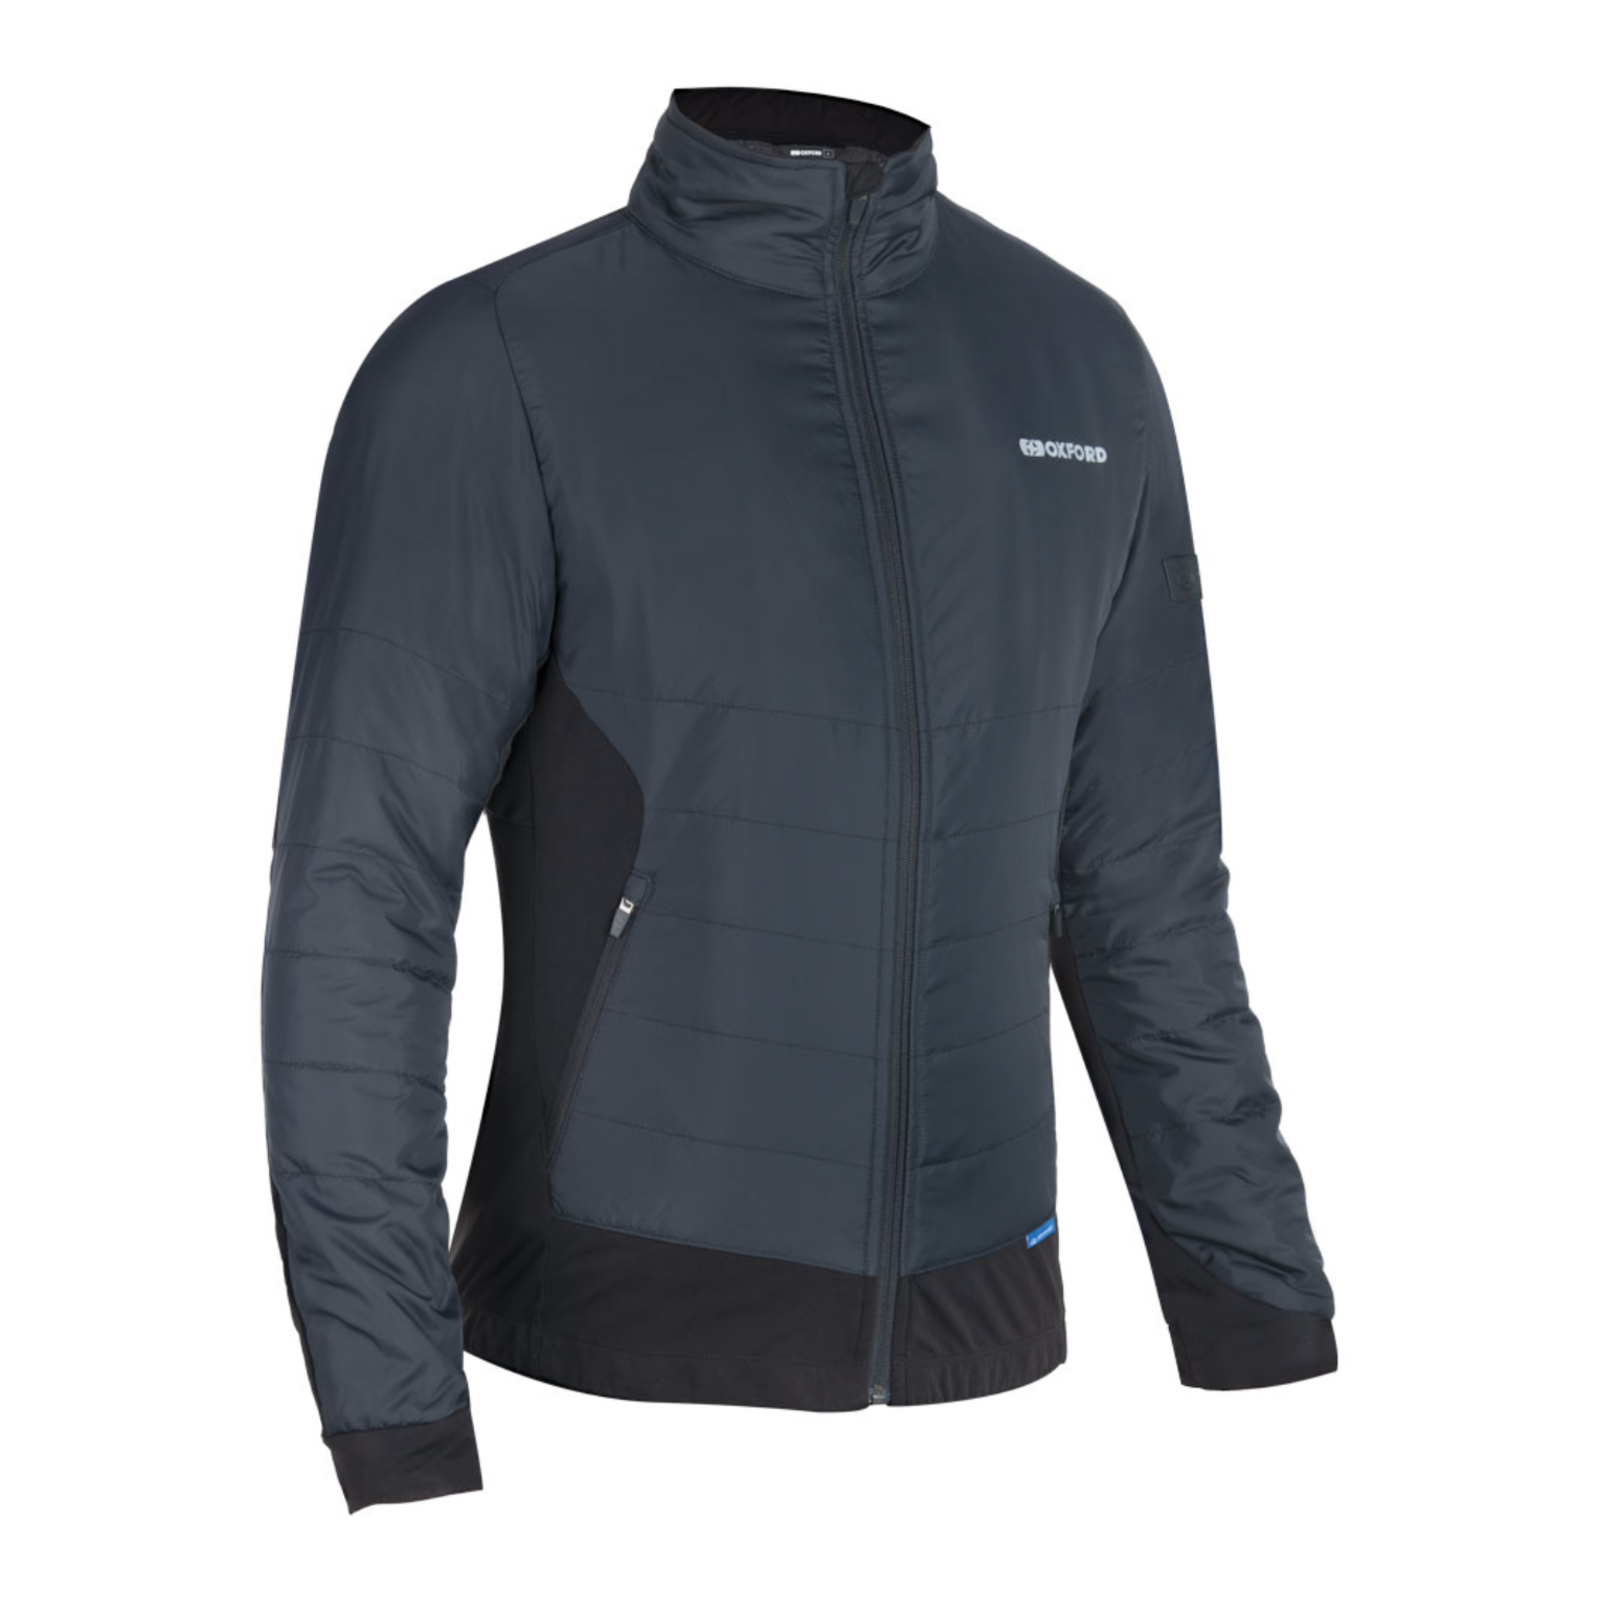 Oxford Advanced Expedition Thermal Jacket - Black (2XL)